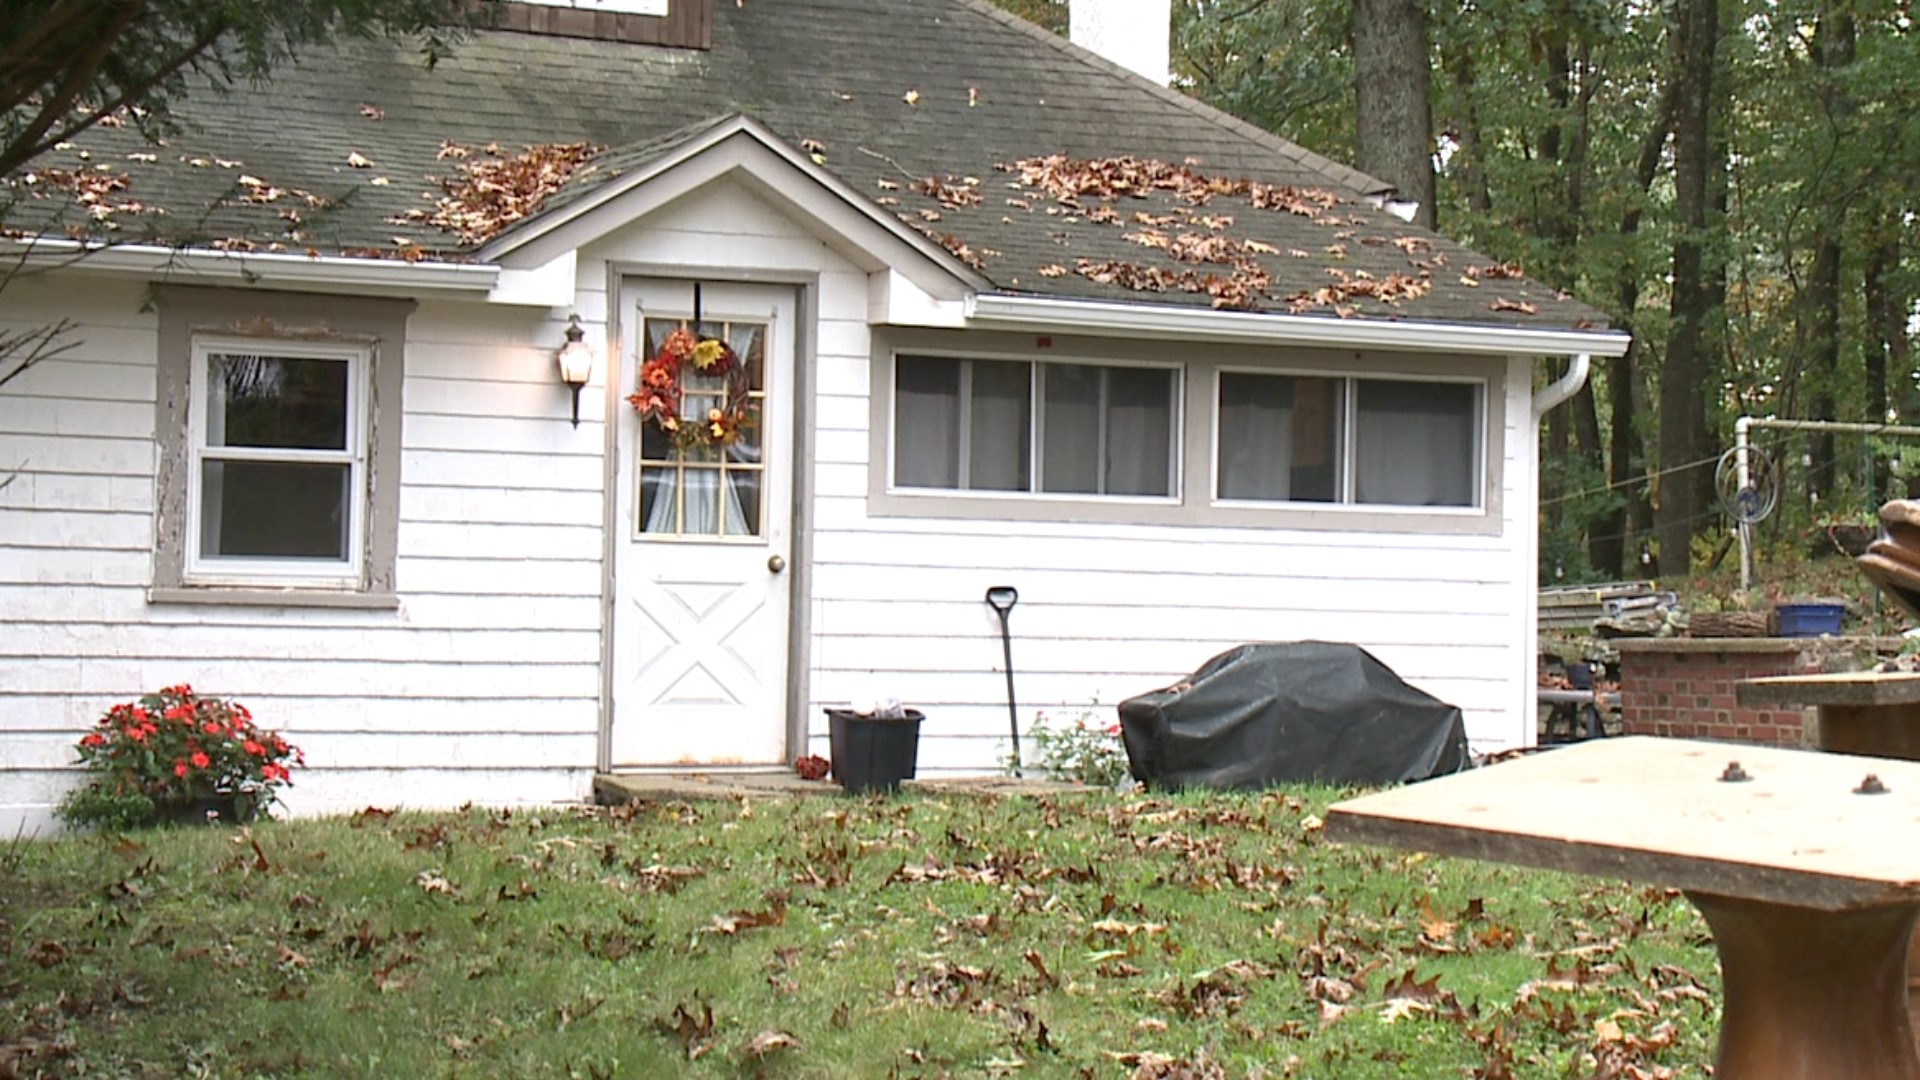 We are learning more about a homicide over the weekend in Luzerne County.